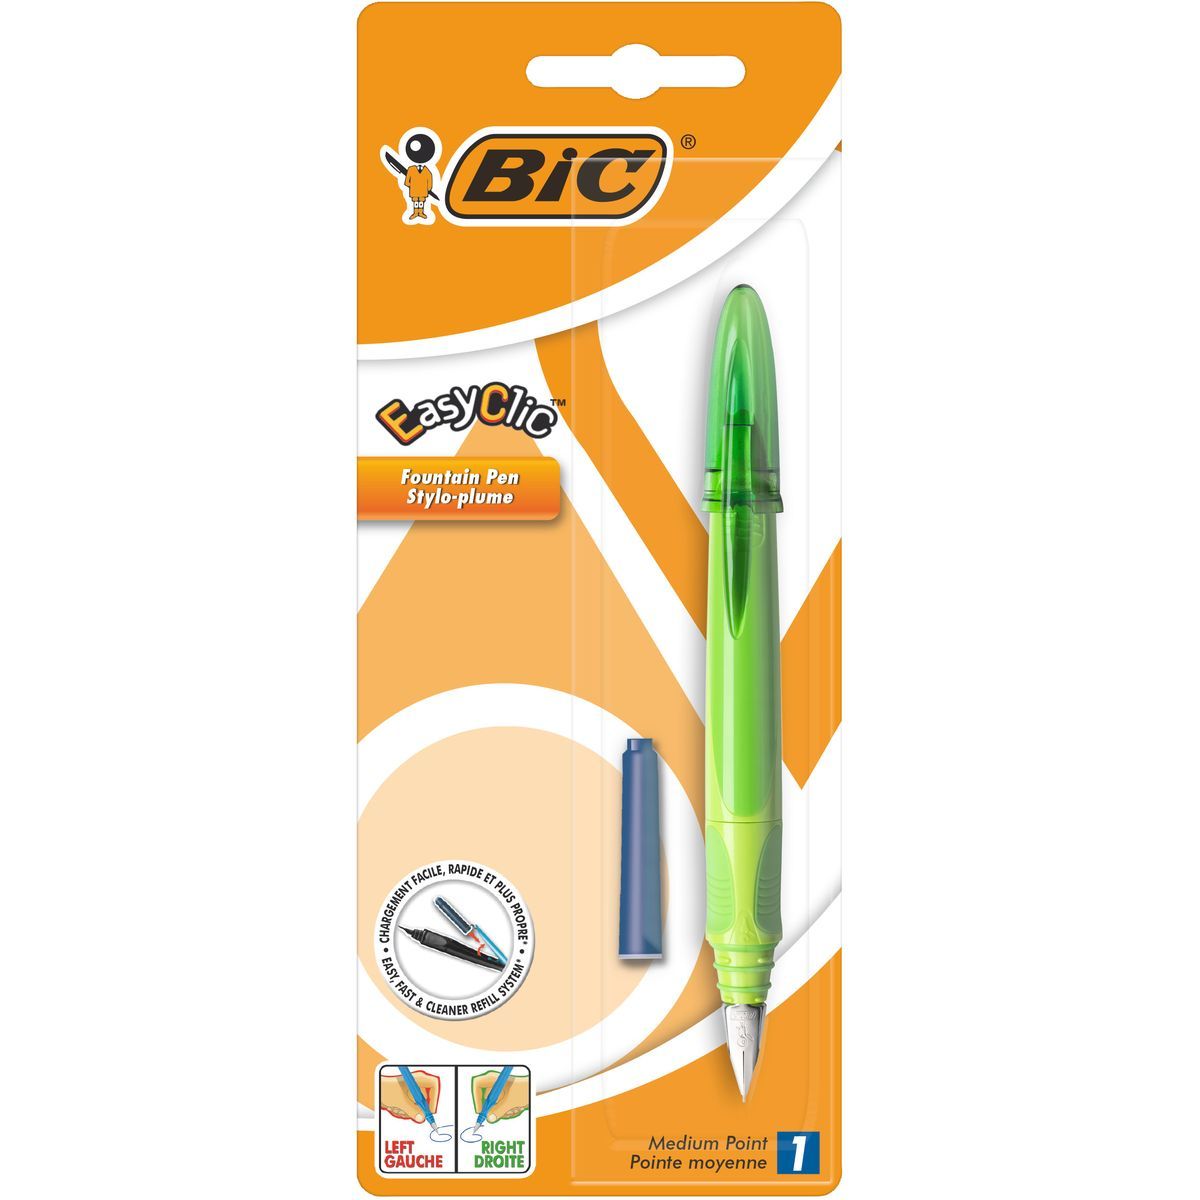 BIC Stylo plume pointe moyenne rechargeable EasyClic vert + 1